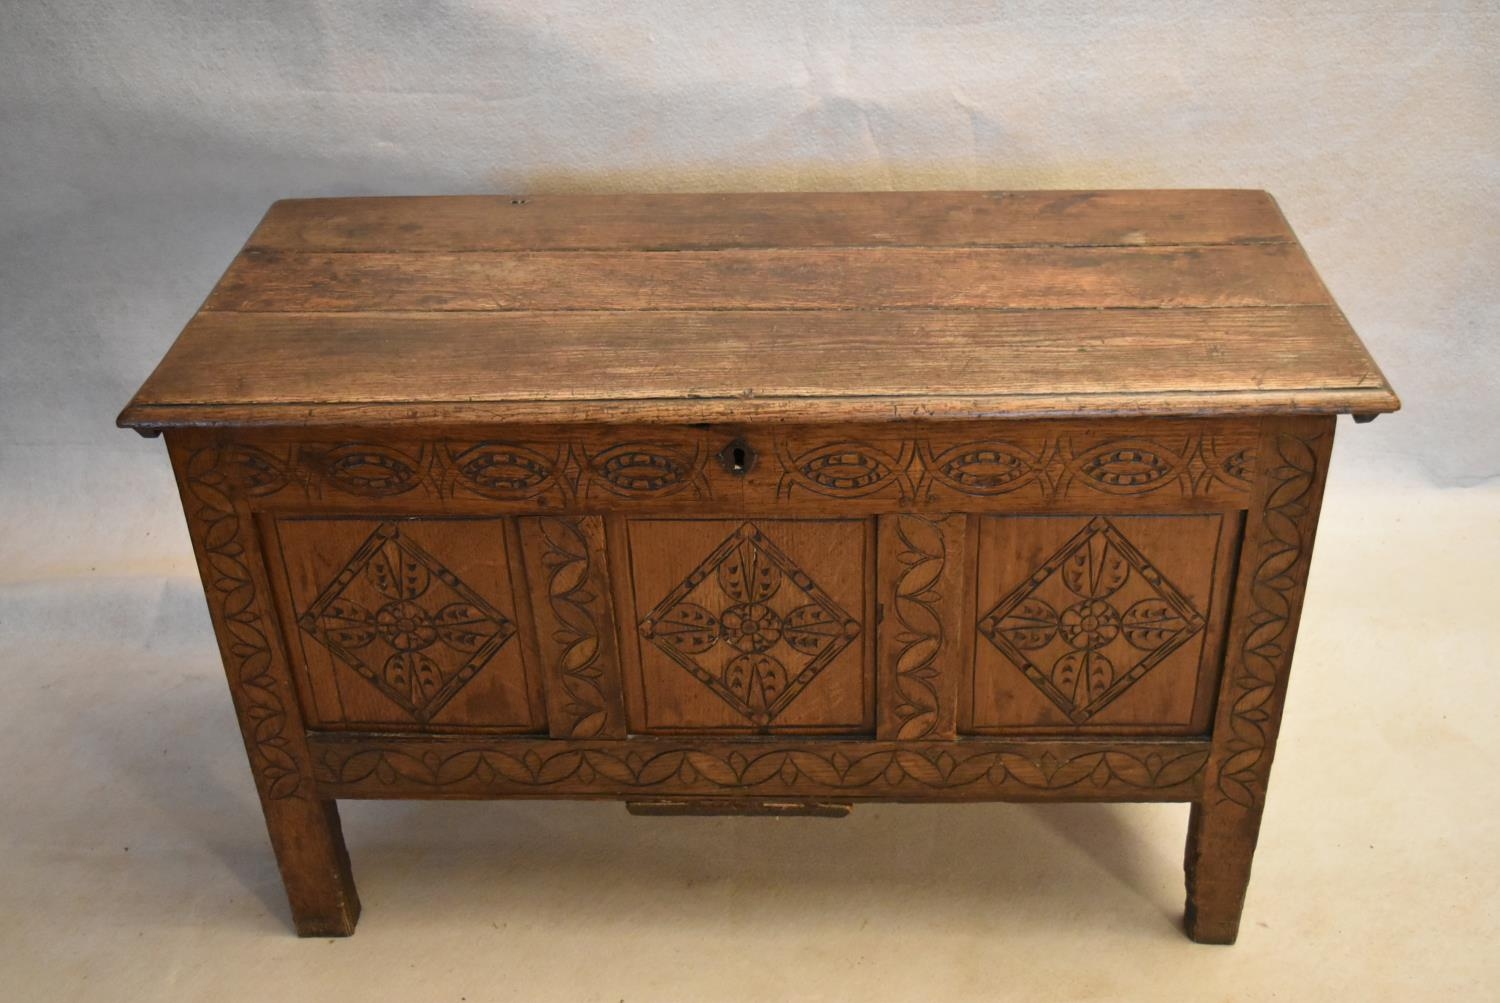 An 18th century country oak coffer with its original hinges and lozenge carved panels raised on - Image 2 of 10